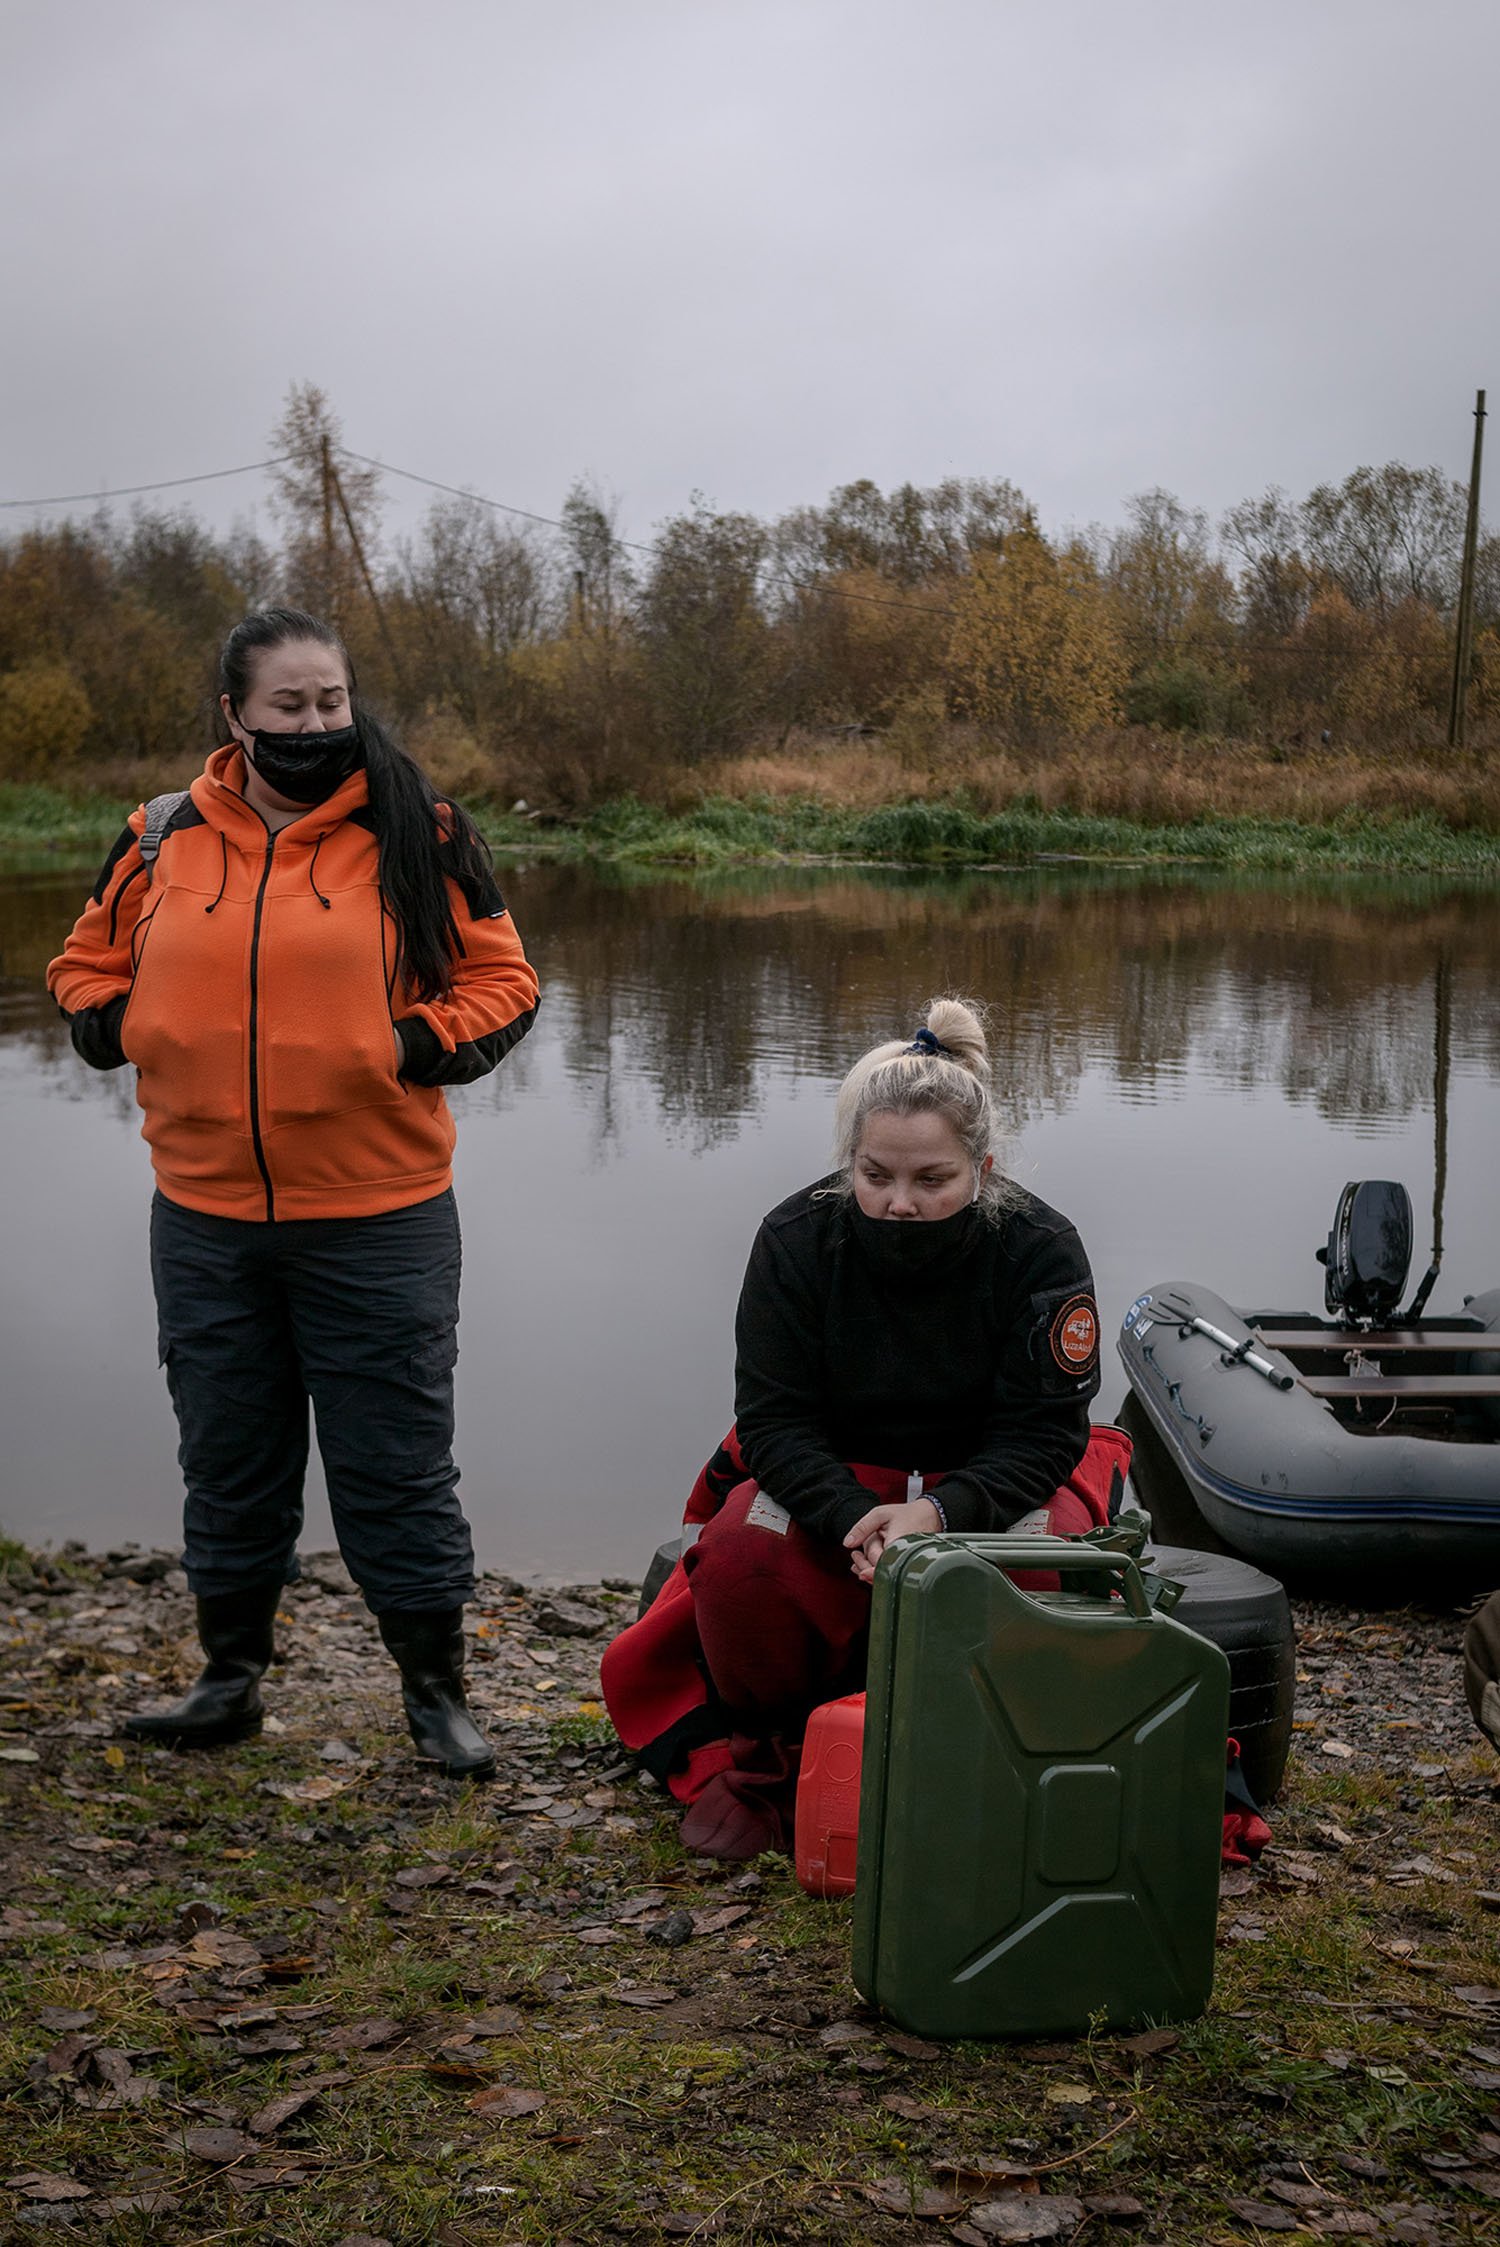 Volunteers carrying out an underwater search in Novoladozhsky canal.